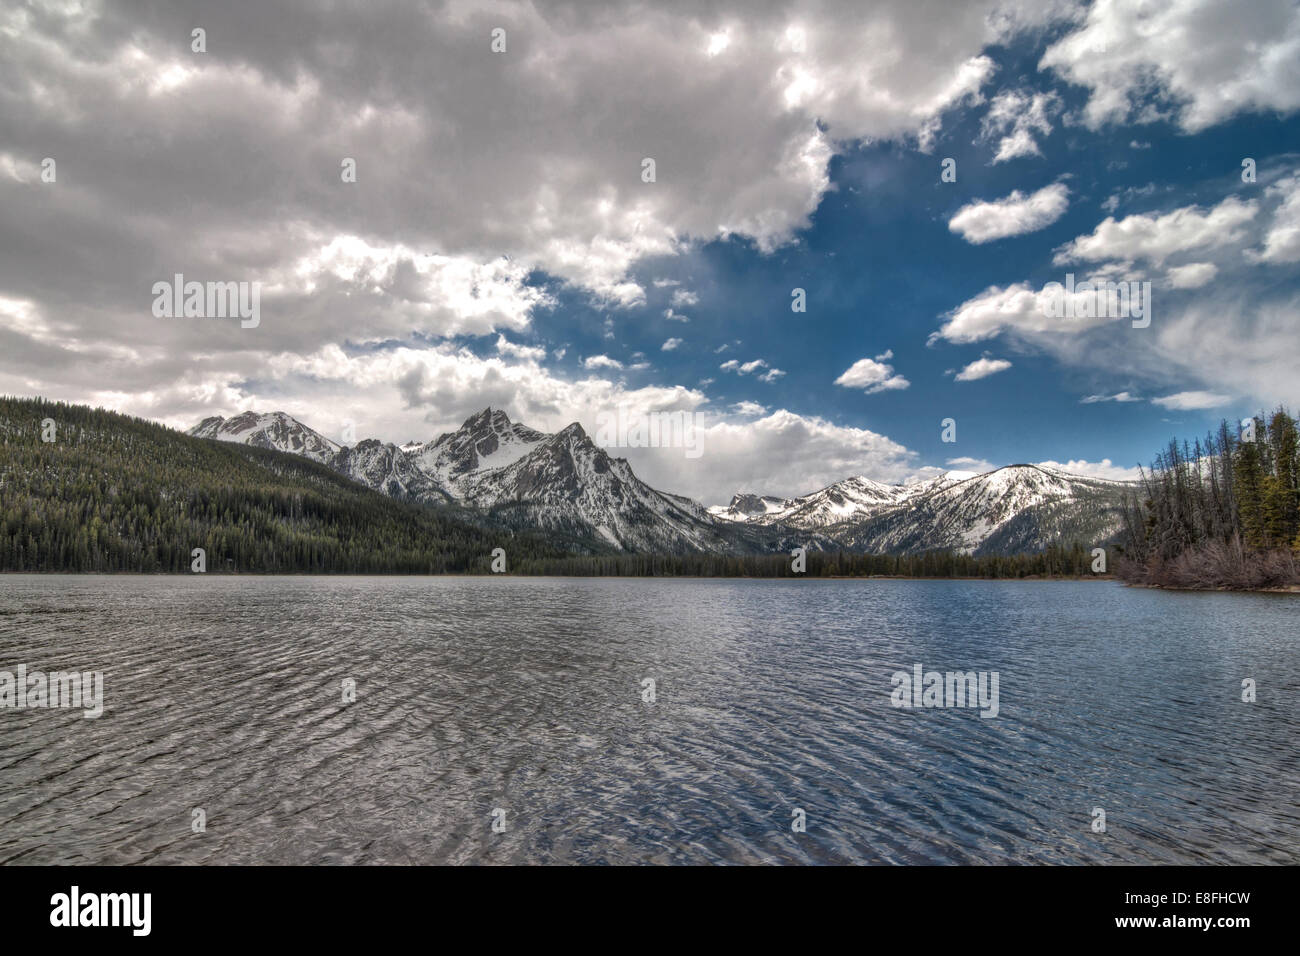 USA, Idaho, Custer County, Custer, Stanley See, National Forest Development, Lakeside Blick auf Berge Stockfoto